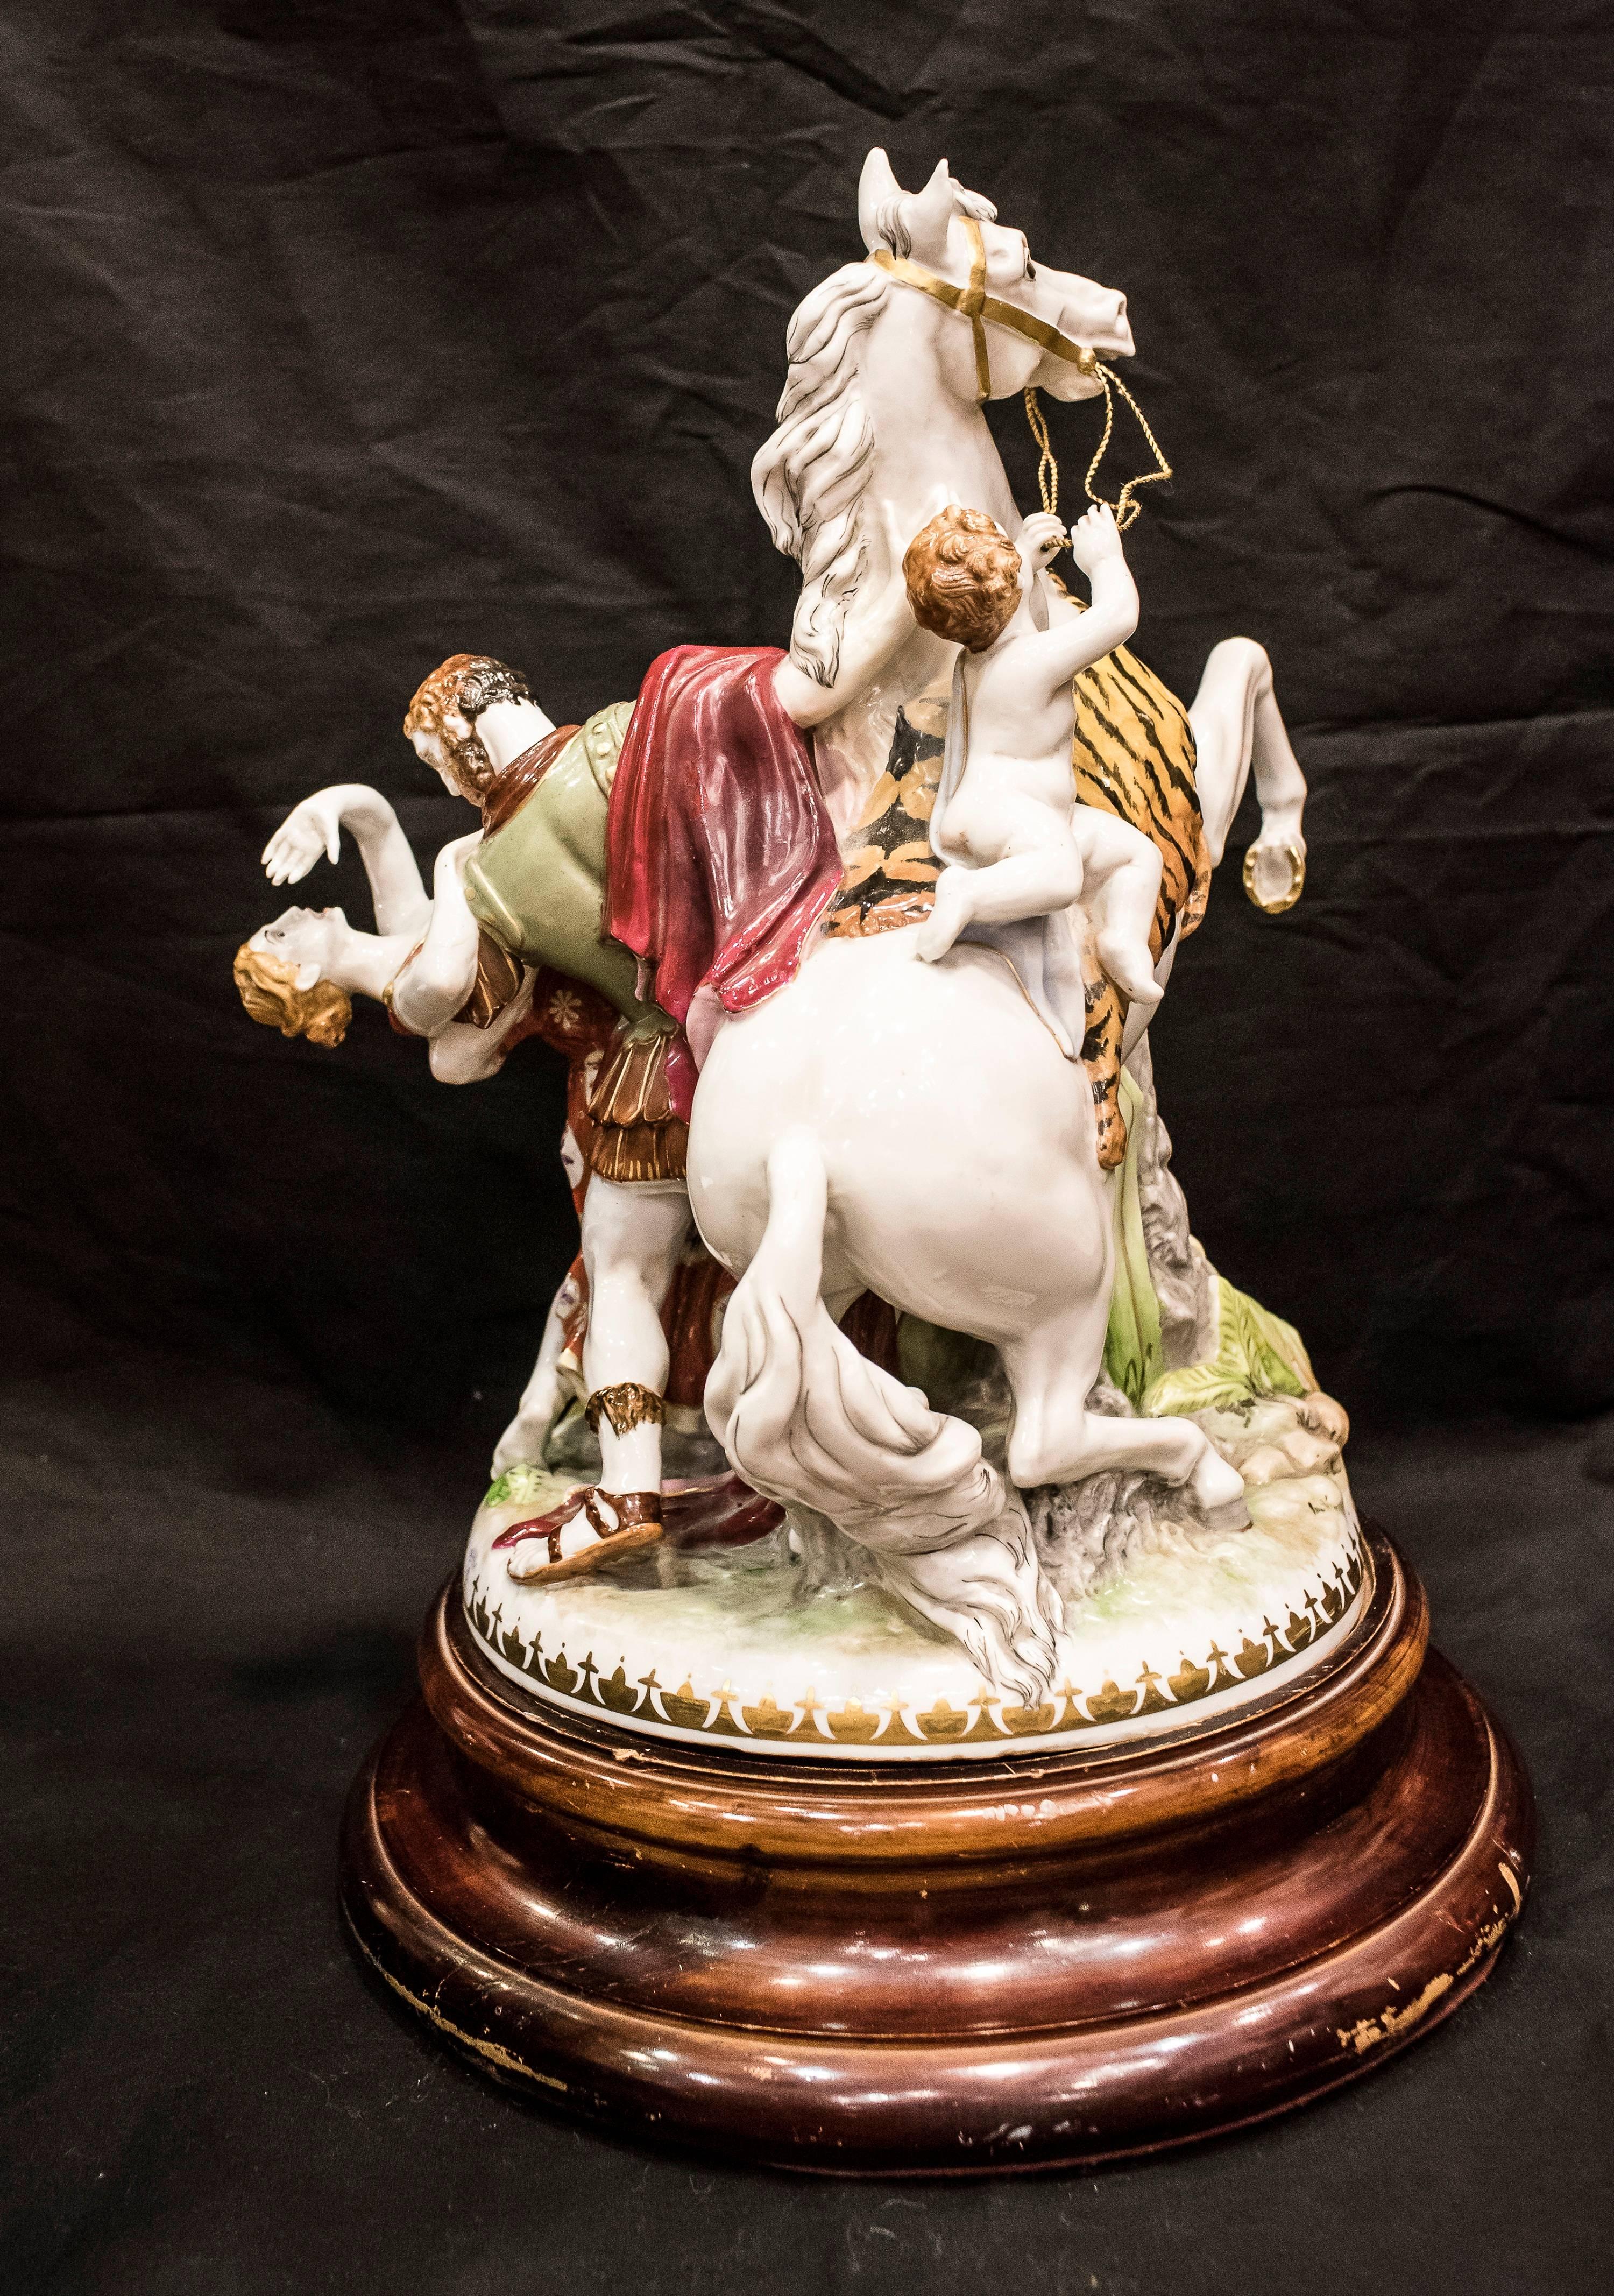 Early 19th Century Capodimonti 19th Century Polychrome Porcelain Signed Italian Sculpture